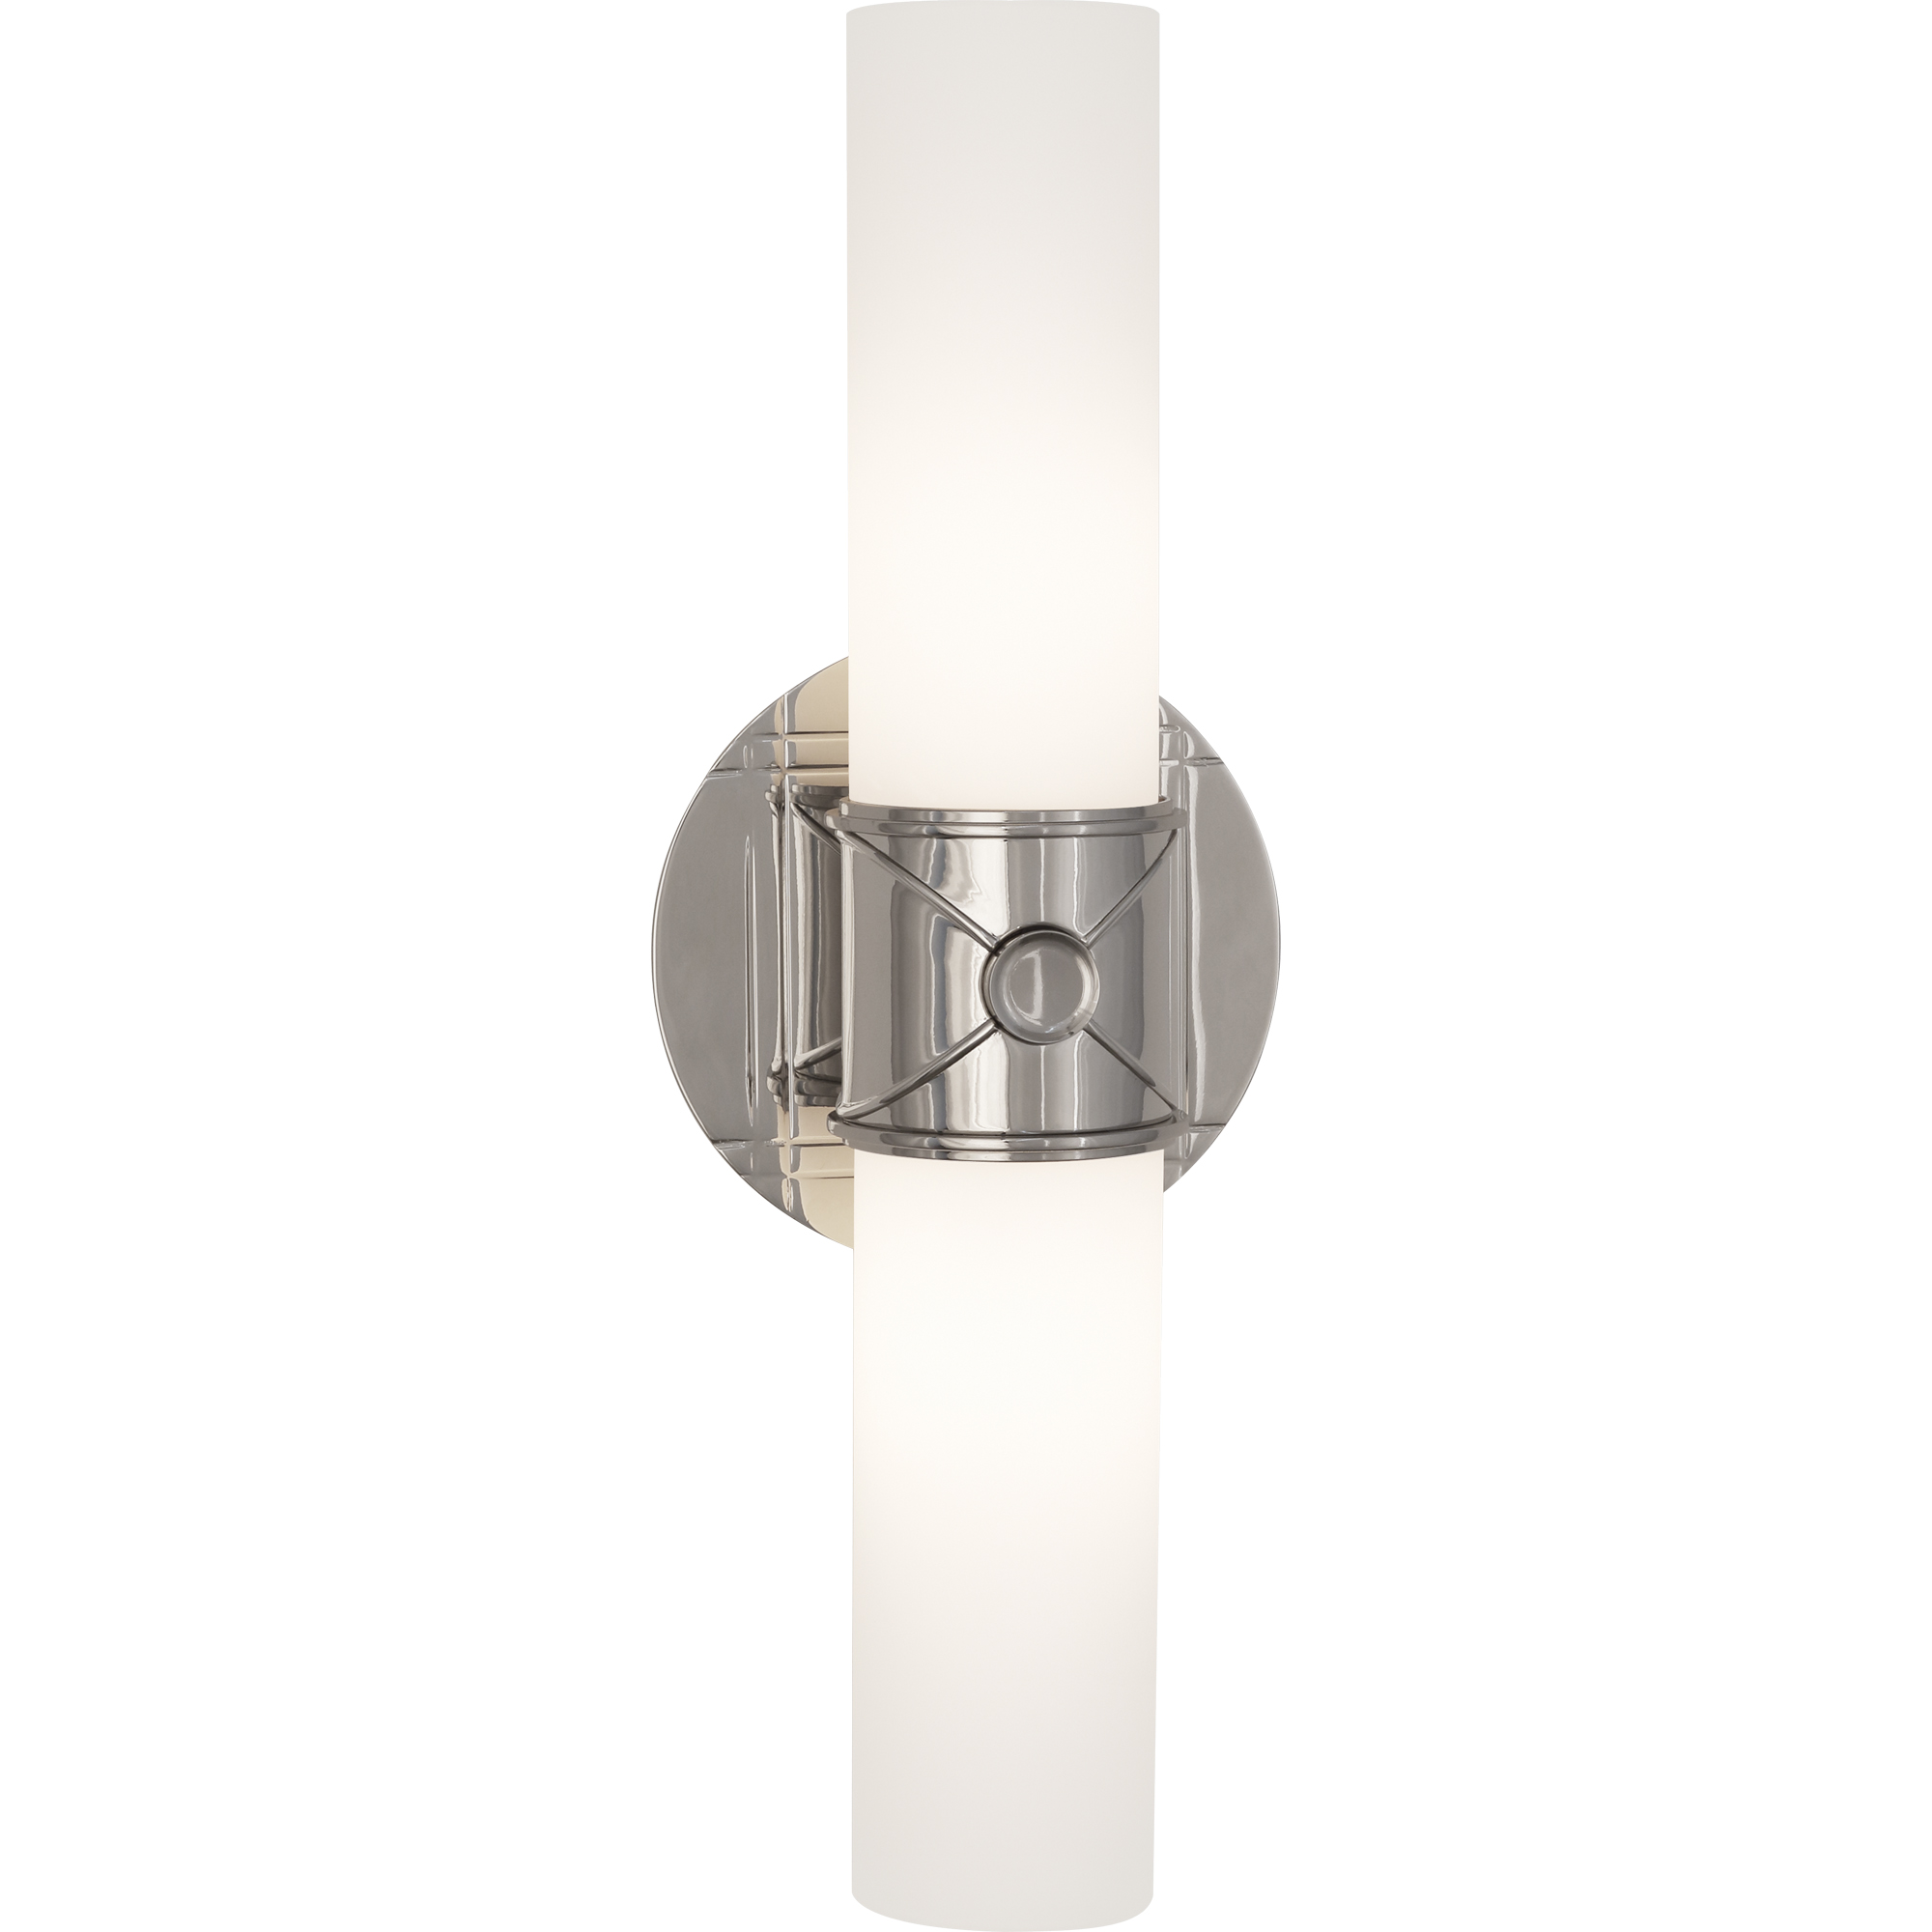 Jonathan Adler Maxime Wall Sconce Style #S633